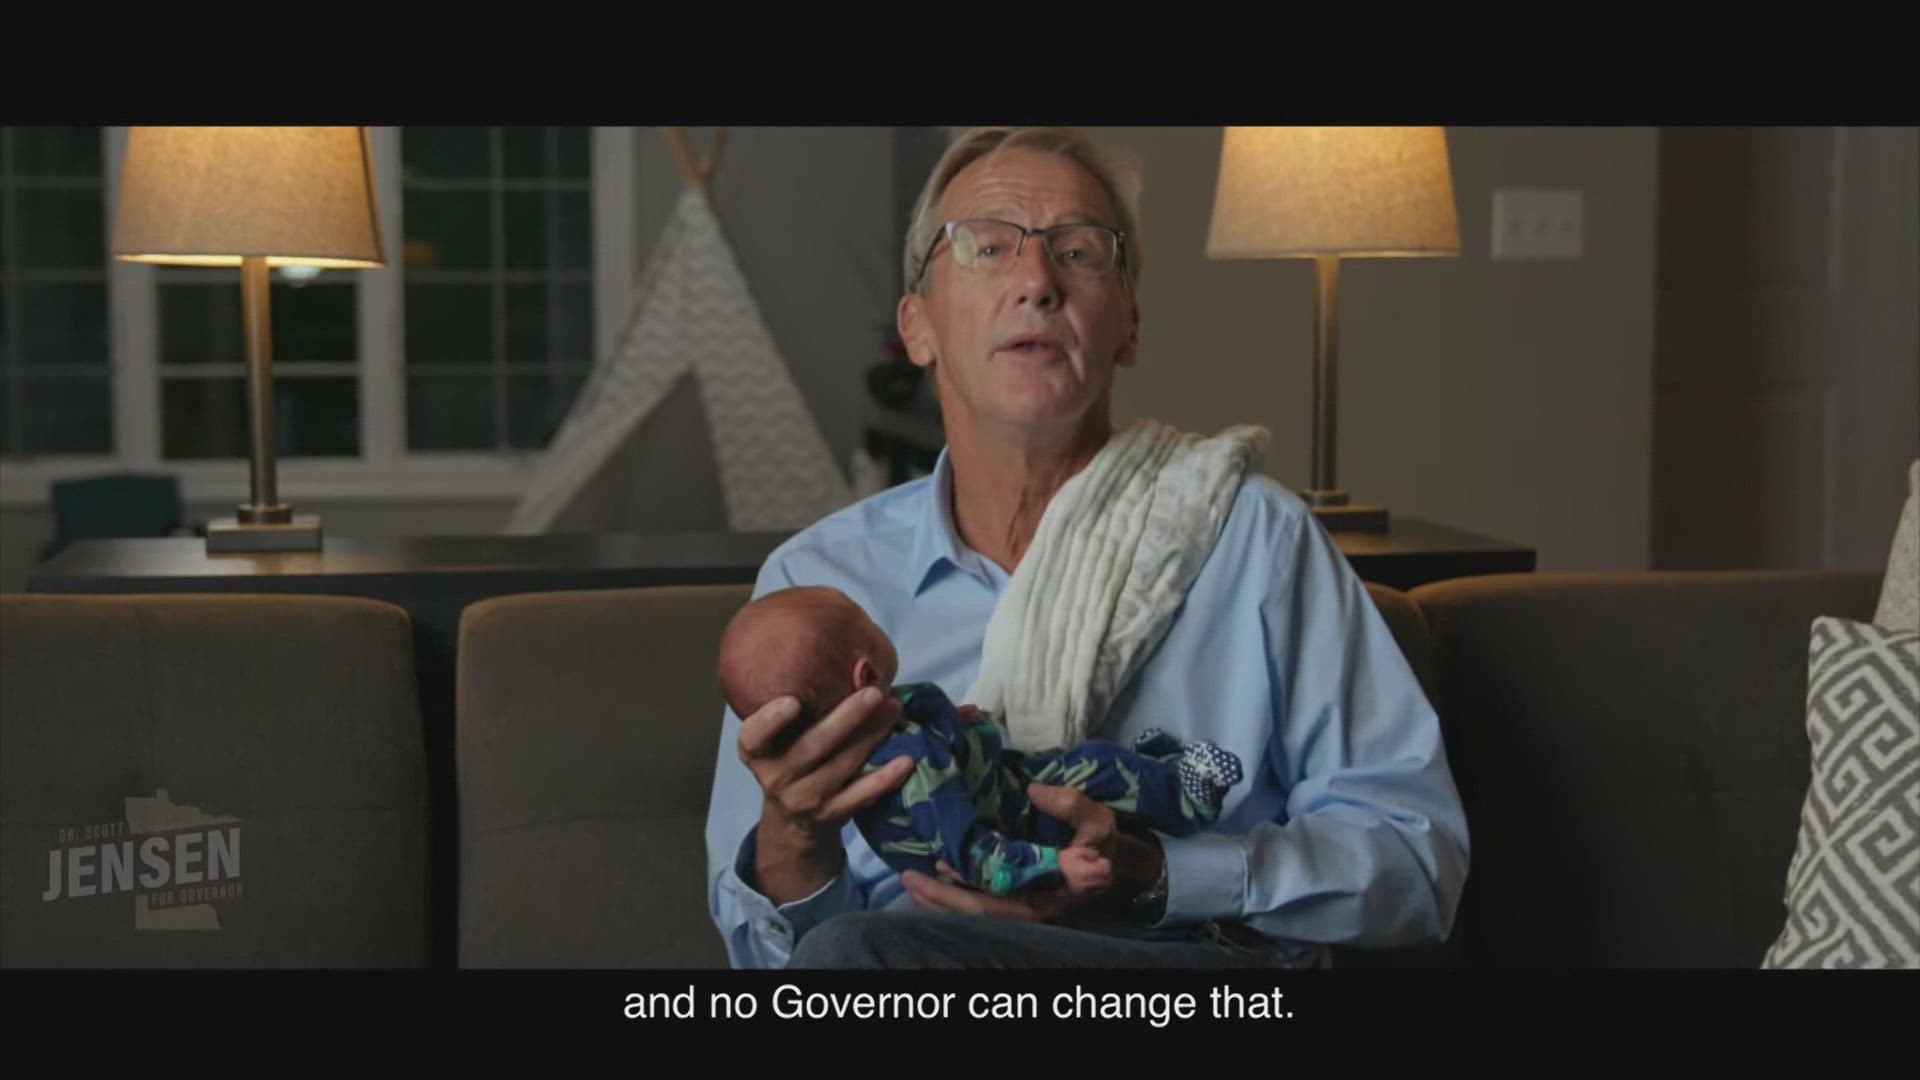 Political reporter John Croman breaks down how this ad could impact November's election.